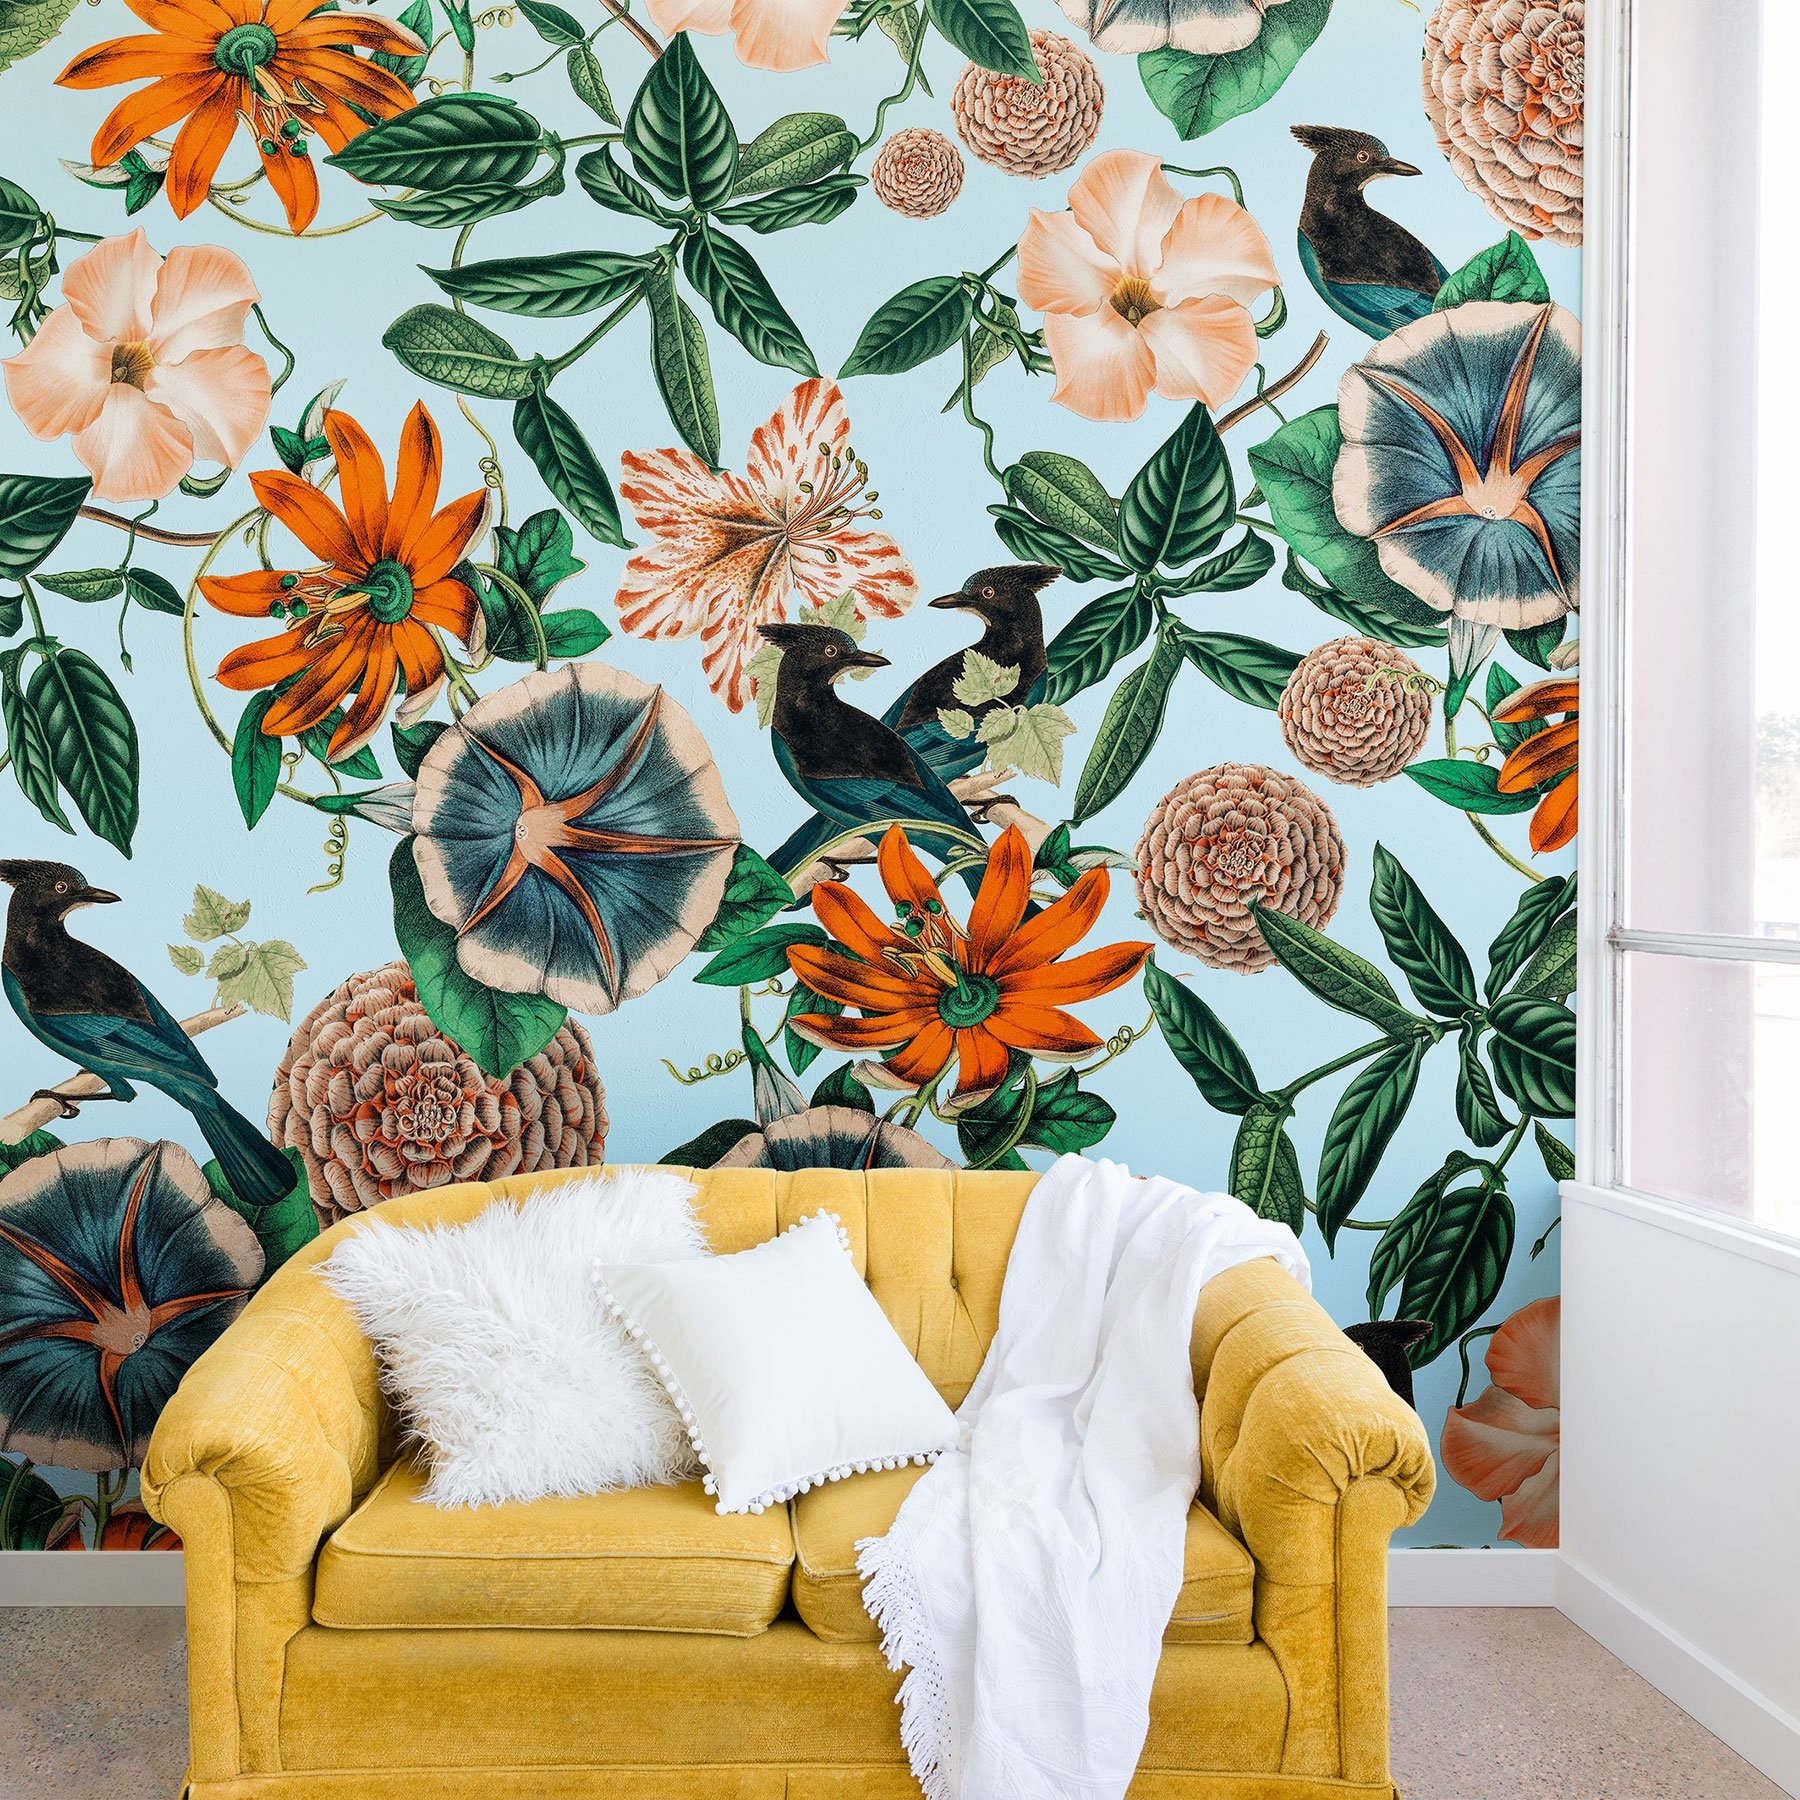 83 Oranges Forest Birds Wall Mural - 12ft x 8ft - Image 2